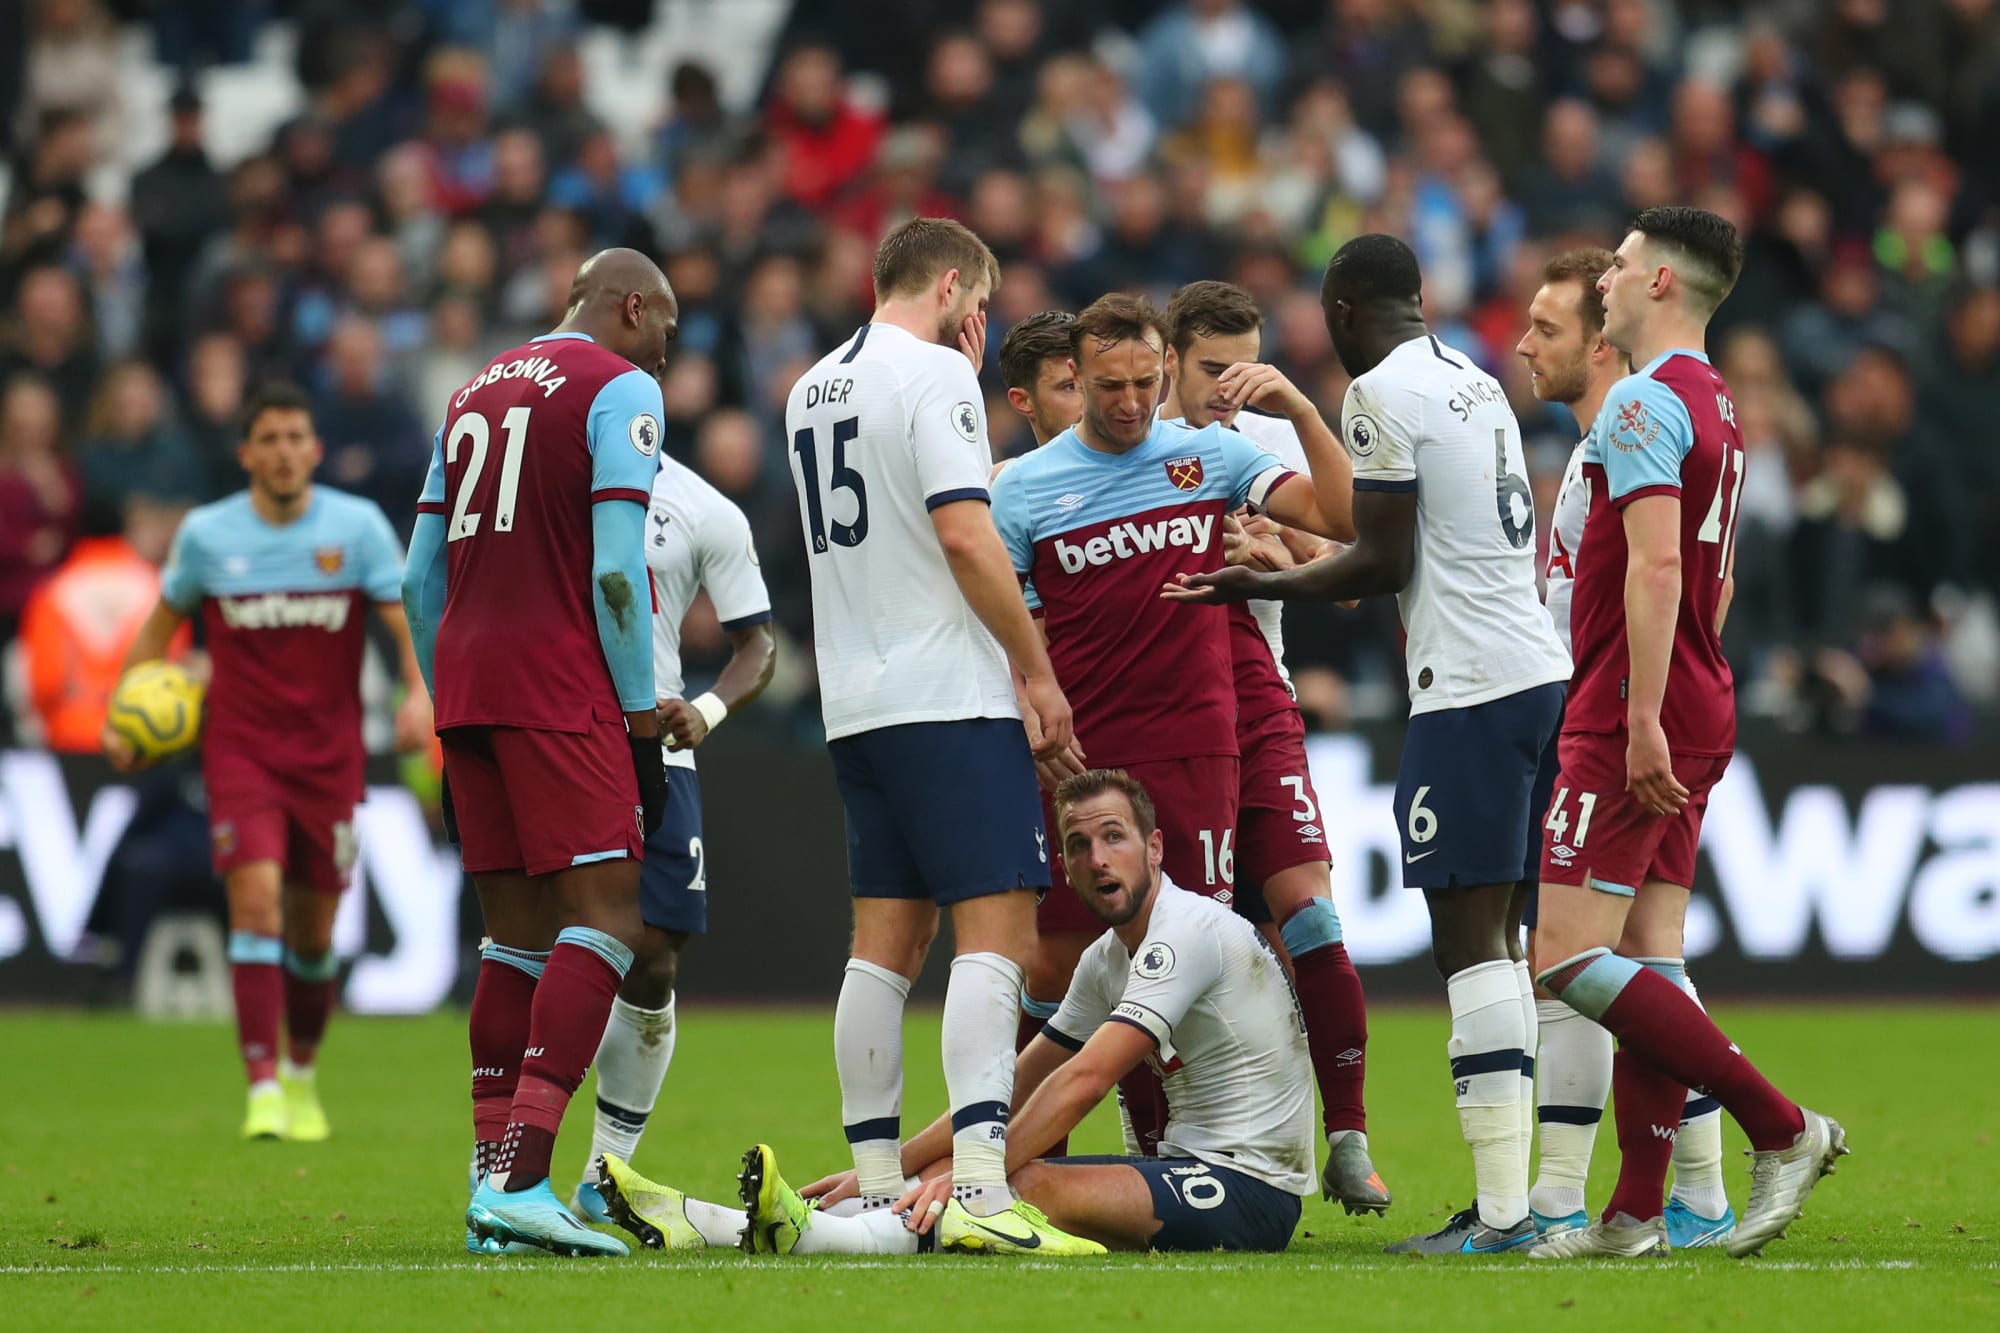 West Ham lose in predictably pathetic style to Spurs